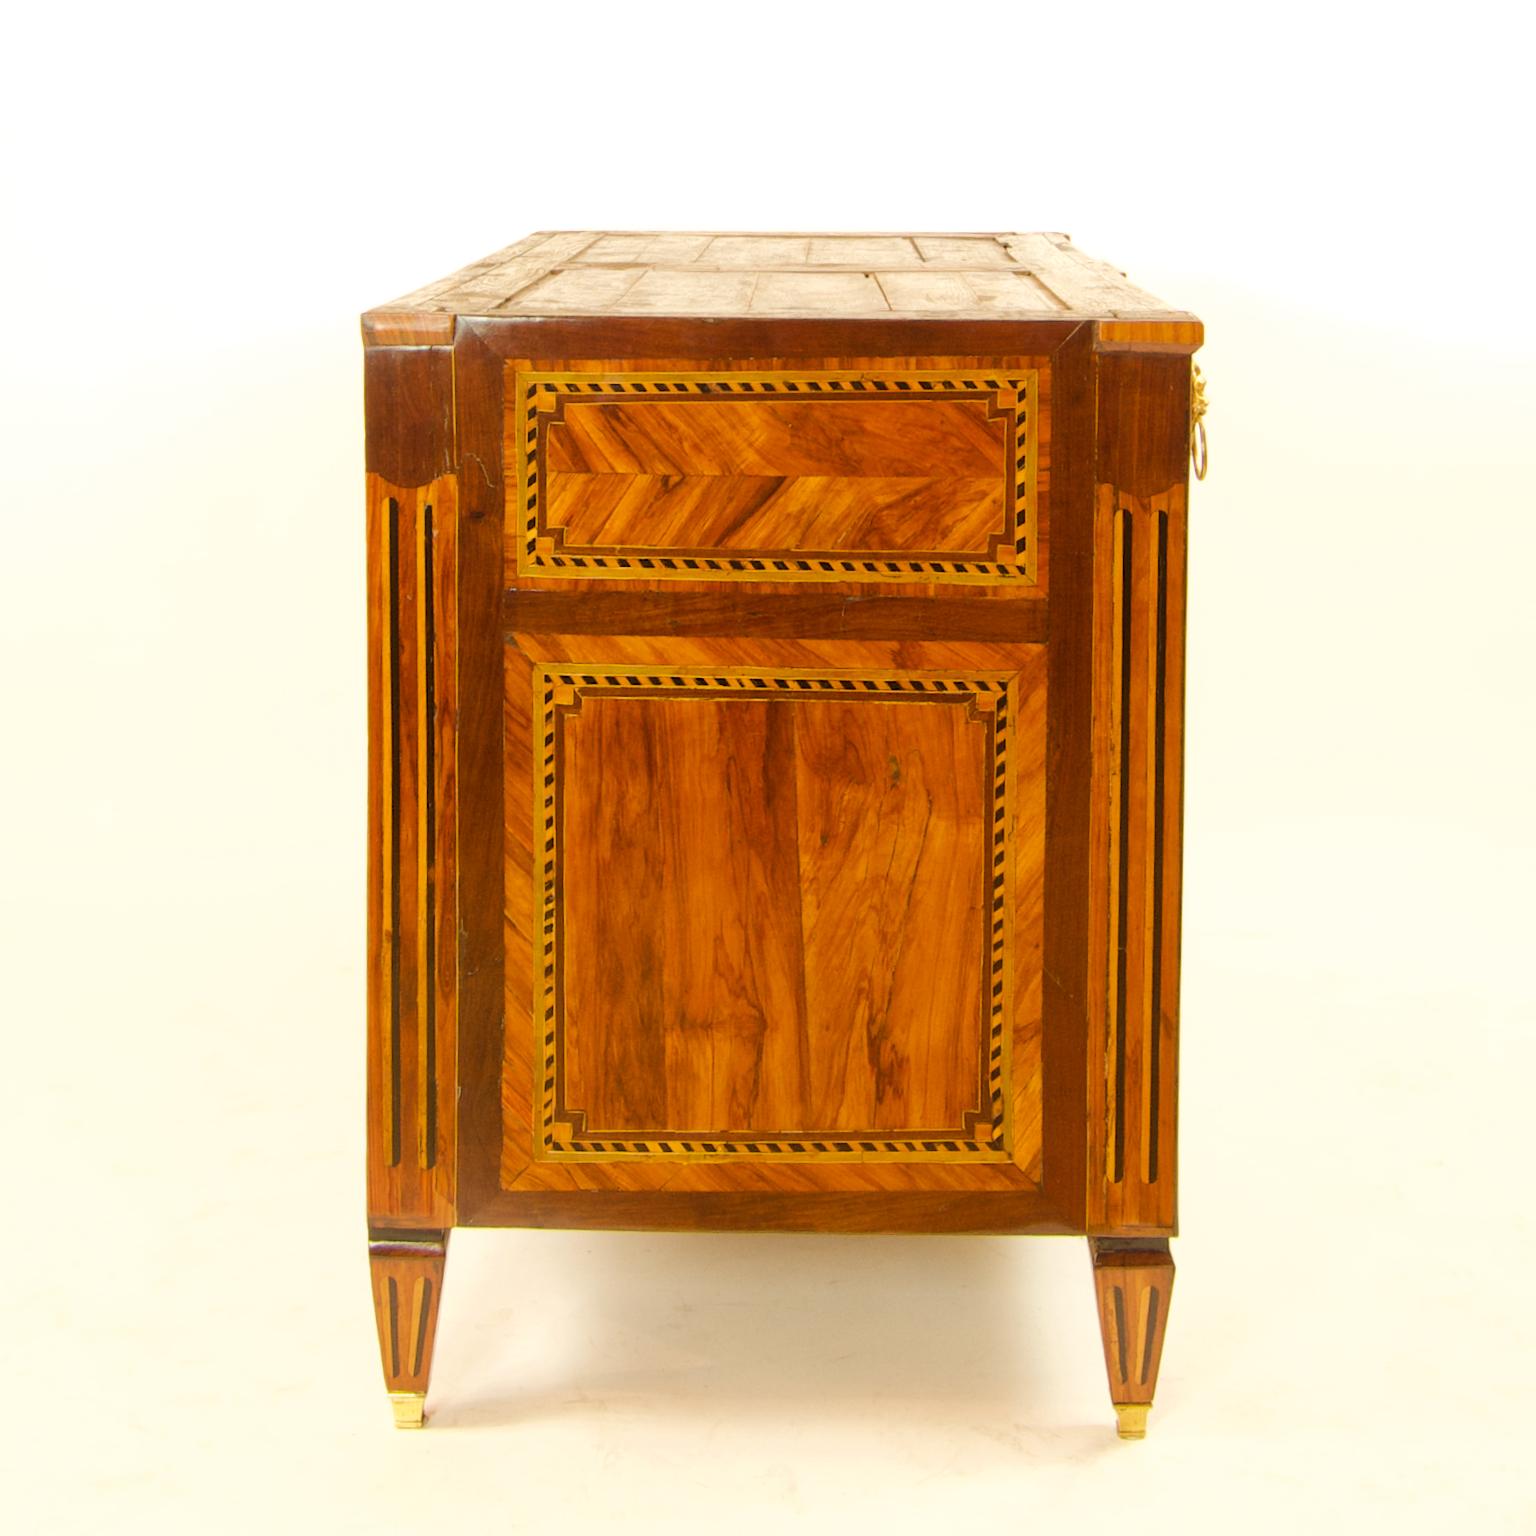 Late 18th Century Large French 18th Century Louis XVI Marquetry Commode or Chest of Drawers